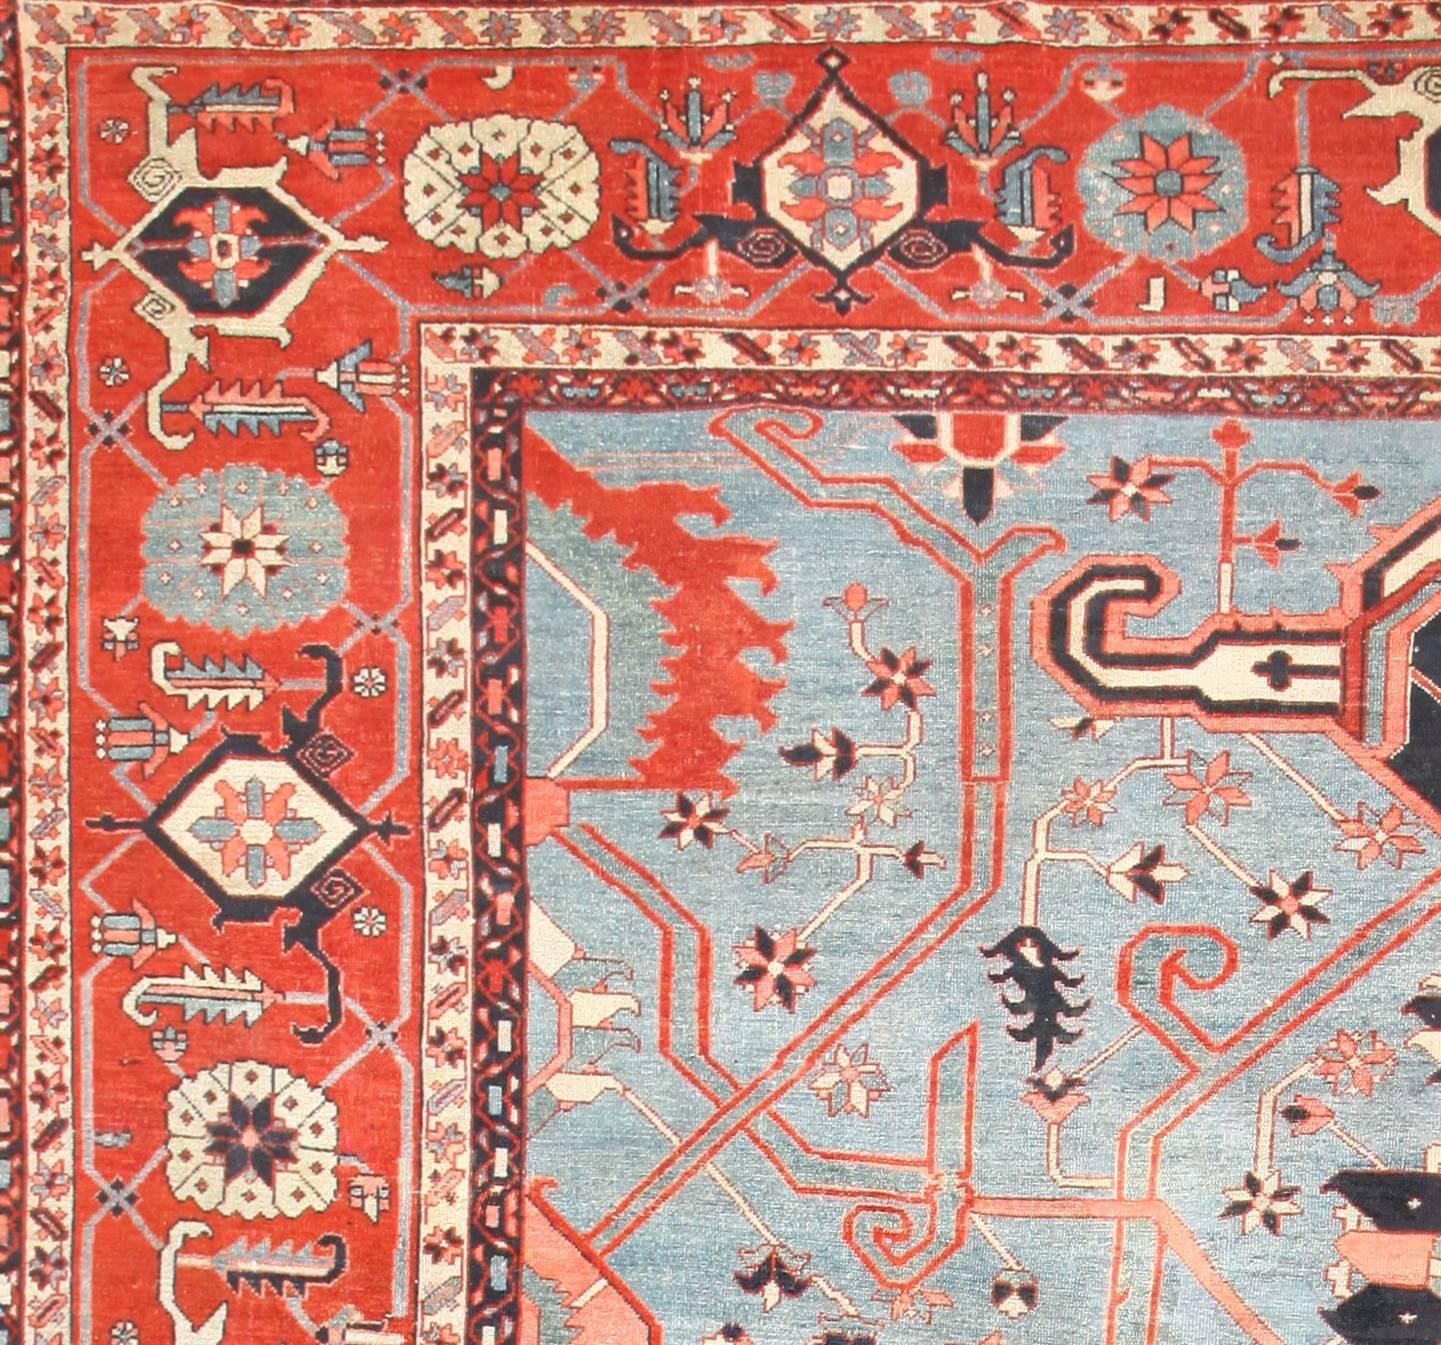 The district of Heriz has always stood out for its aesthetically appealing antique rug creations. These elegant, softly colored and richly patterned carpets continue to attract new generations of consumers and collectors. Antique Heriz carpets are